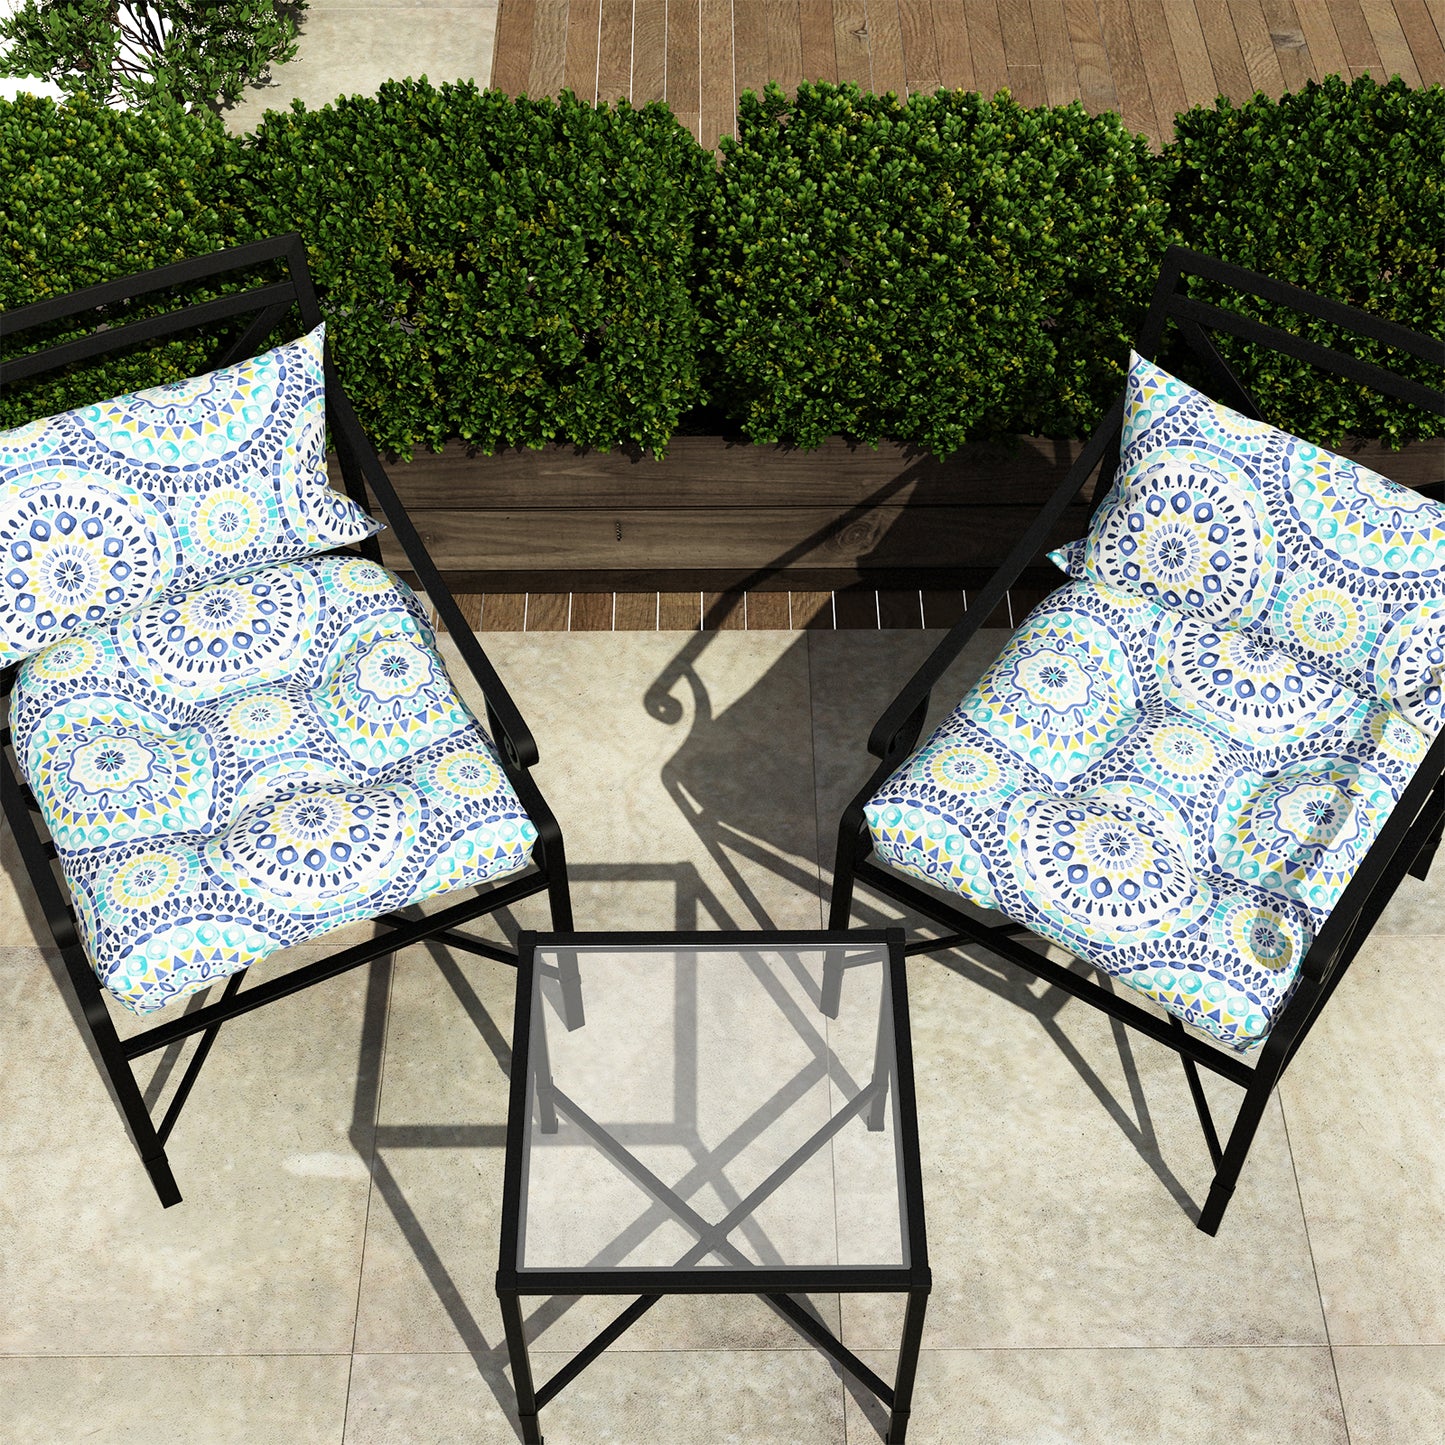 Melody Elephant Patio Wicker Chair Cushions, All Weather Outdoor Tufted Chair Pads Pack of 2, 19 x 19 x 5 Inch U-Shaped Seat Cushions of Garden Furniture Decoration, Delancey Lagoon